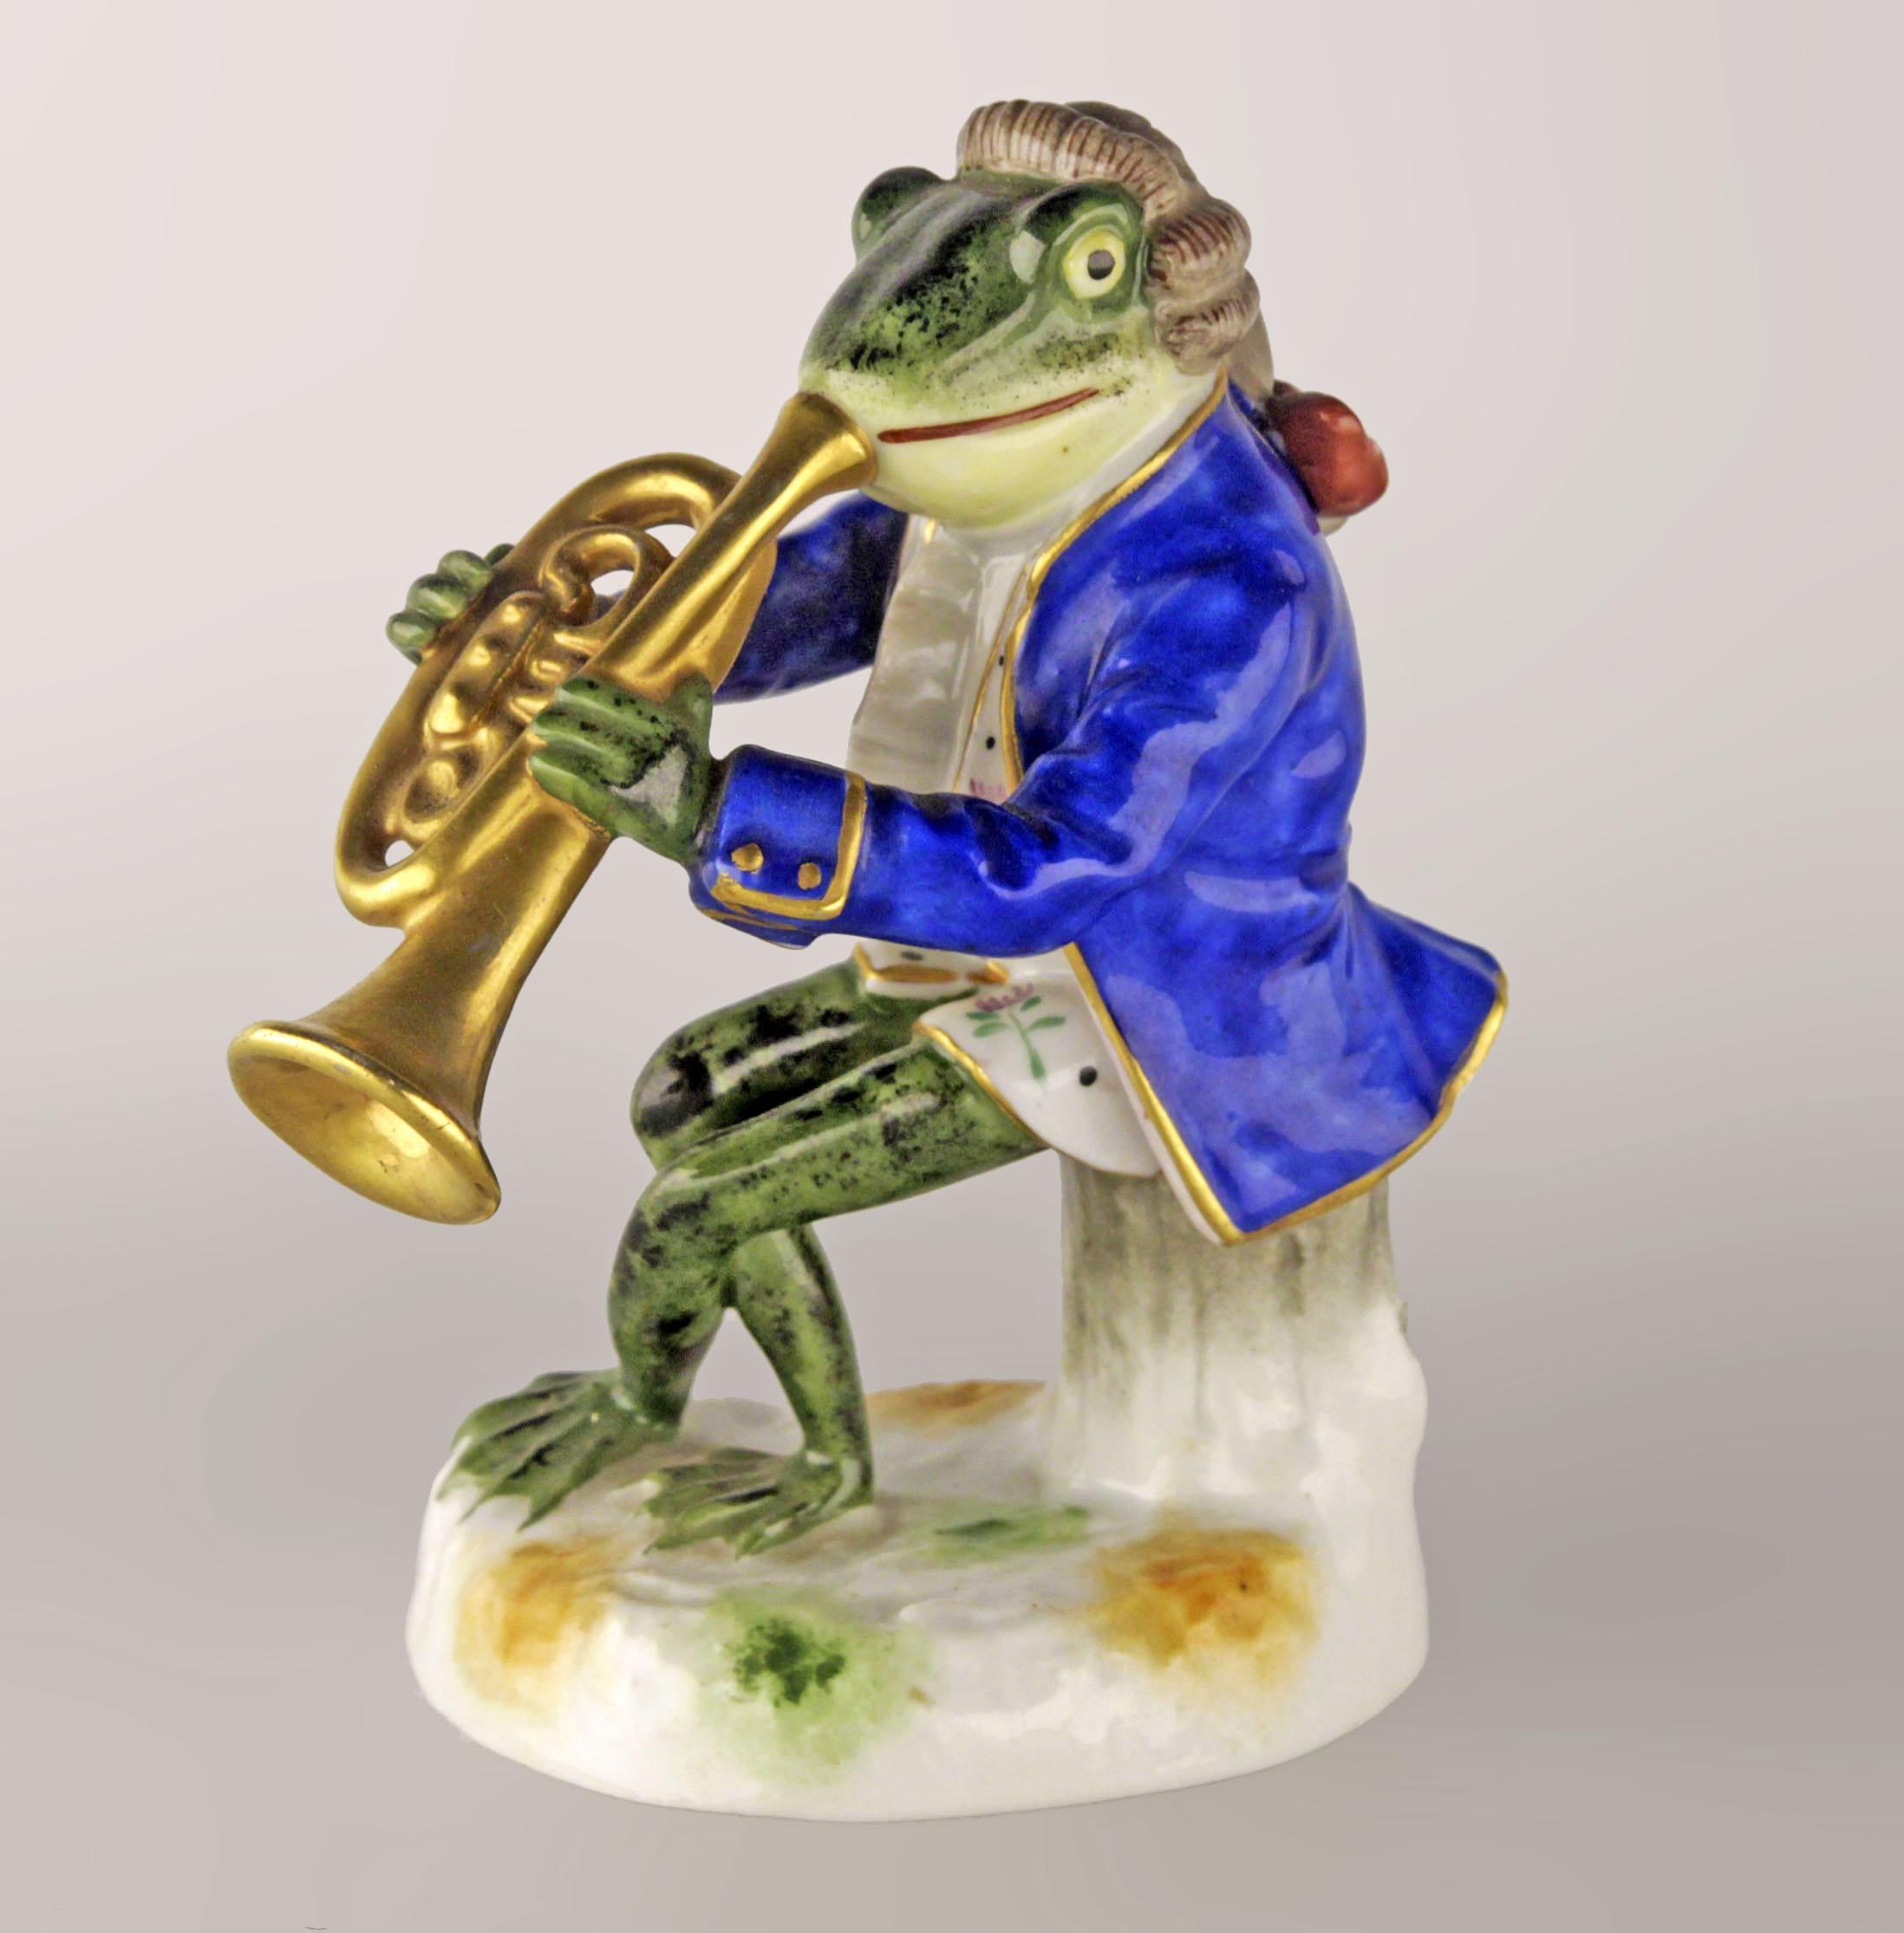 Belle Époque german glazed porcelain figurine of a brass playing frog by Goebel Company

By: Goebel Company
Material: porcelain, paint, ceramic
Technique: glazed, hand-painted, painted, molded, pressed
Dimensions: 4.5 in x 3 in x 5 in
Date: early